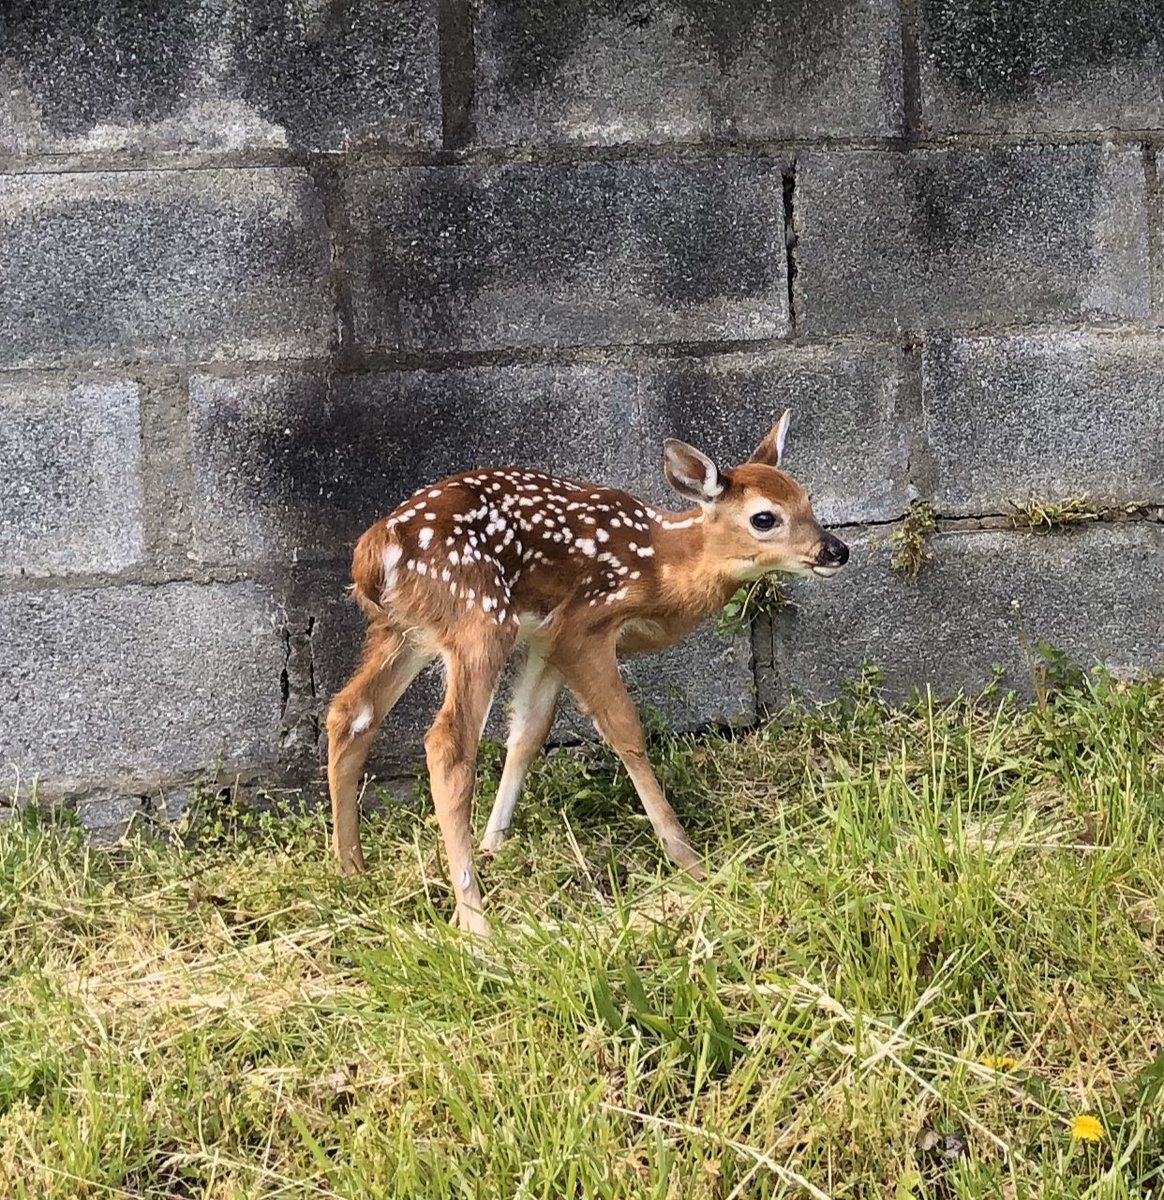 A tiny bit of good news to start Day 60. Yesterday evening, my boys discovered this tiny baby deer — alone, scared and shivering — in a field across the street from our house.This morning we saw it reunited with its mother.